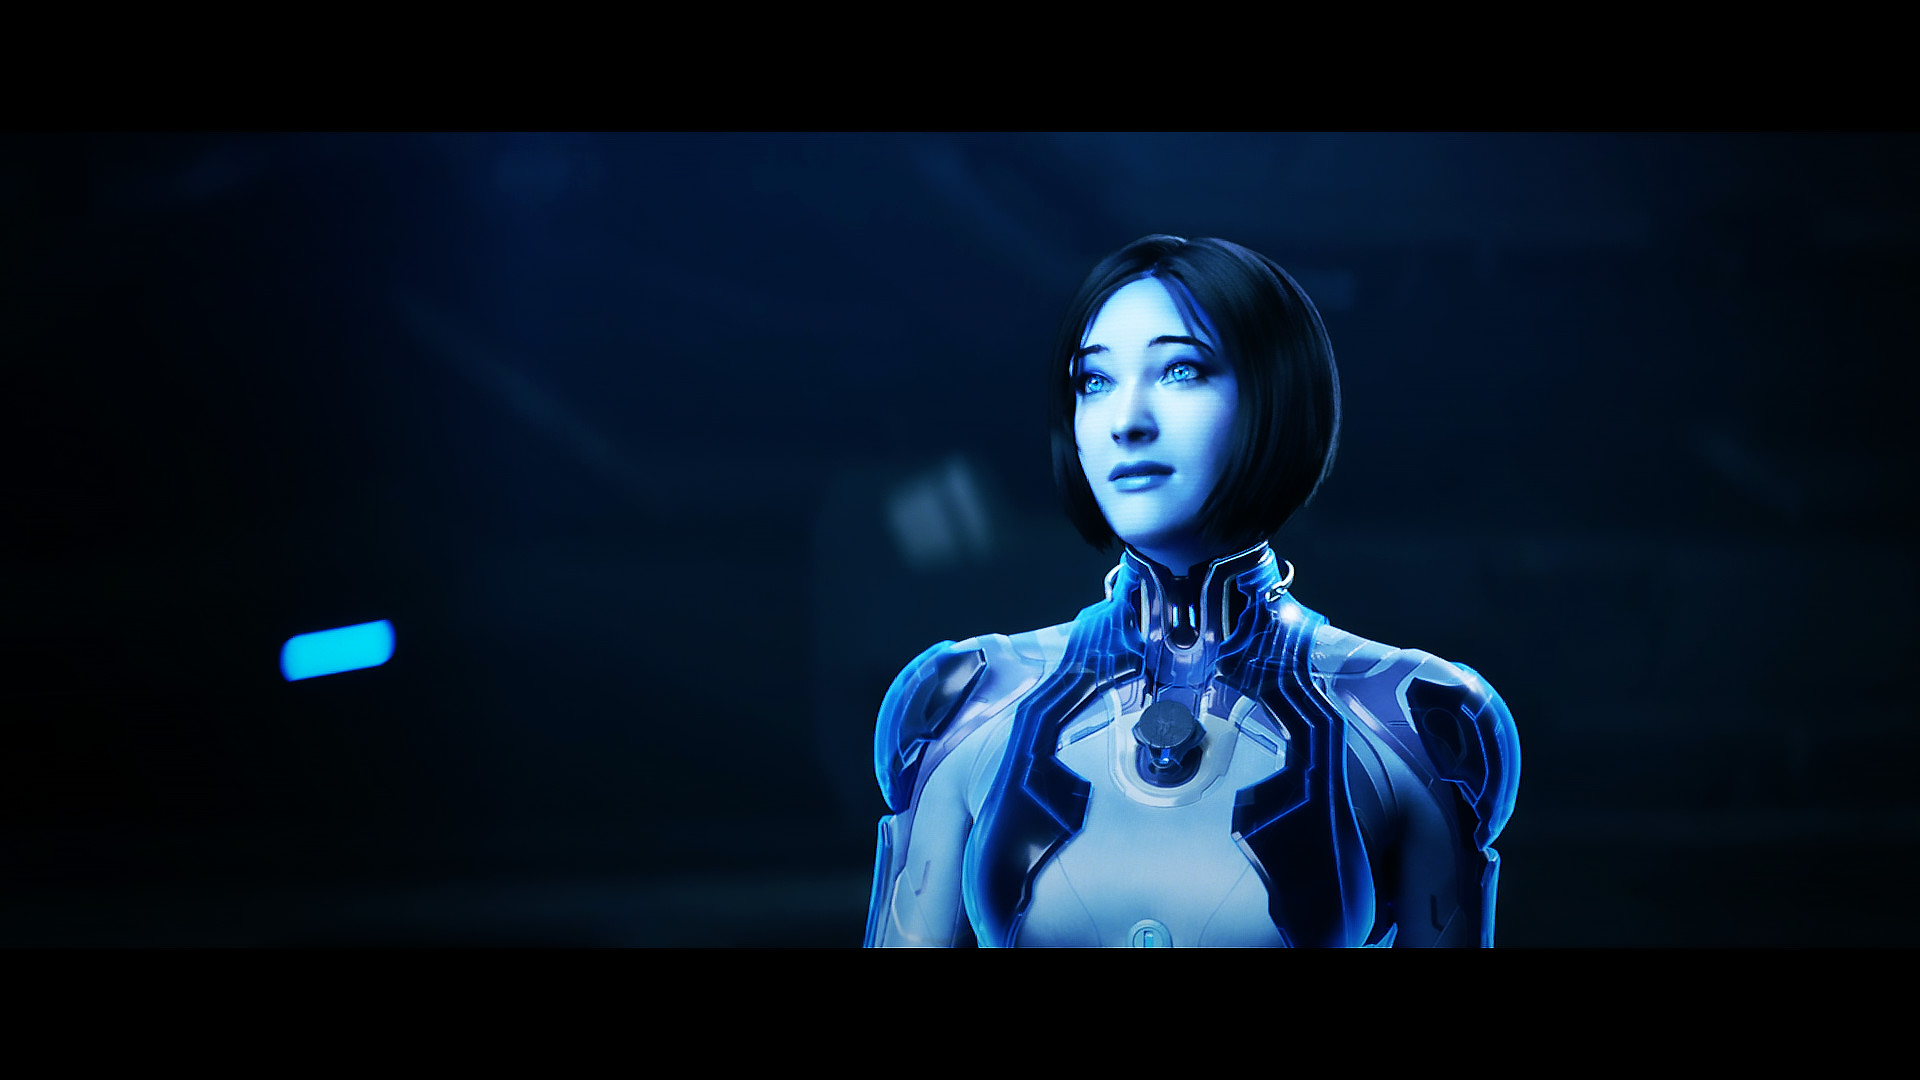 Free Download Halo 5 Cortana Wallpaper 81 Images 1920x1080 For Your